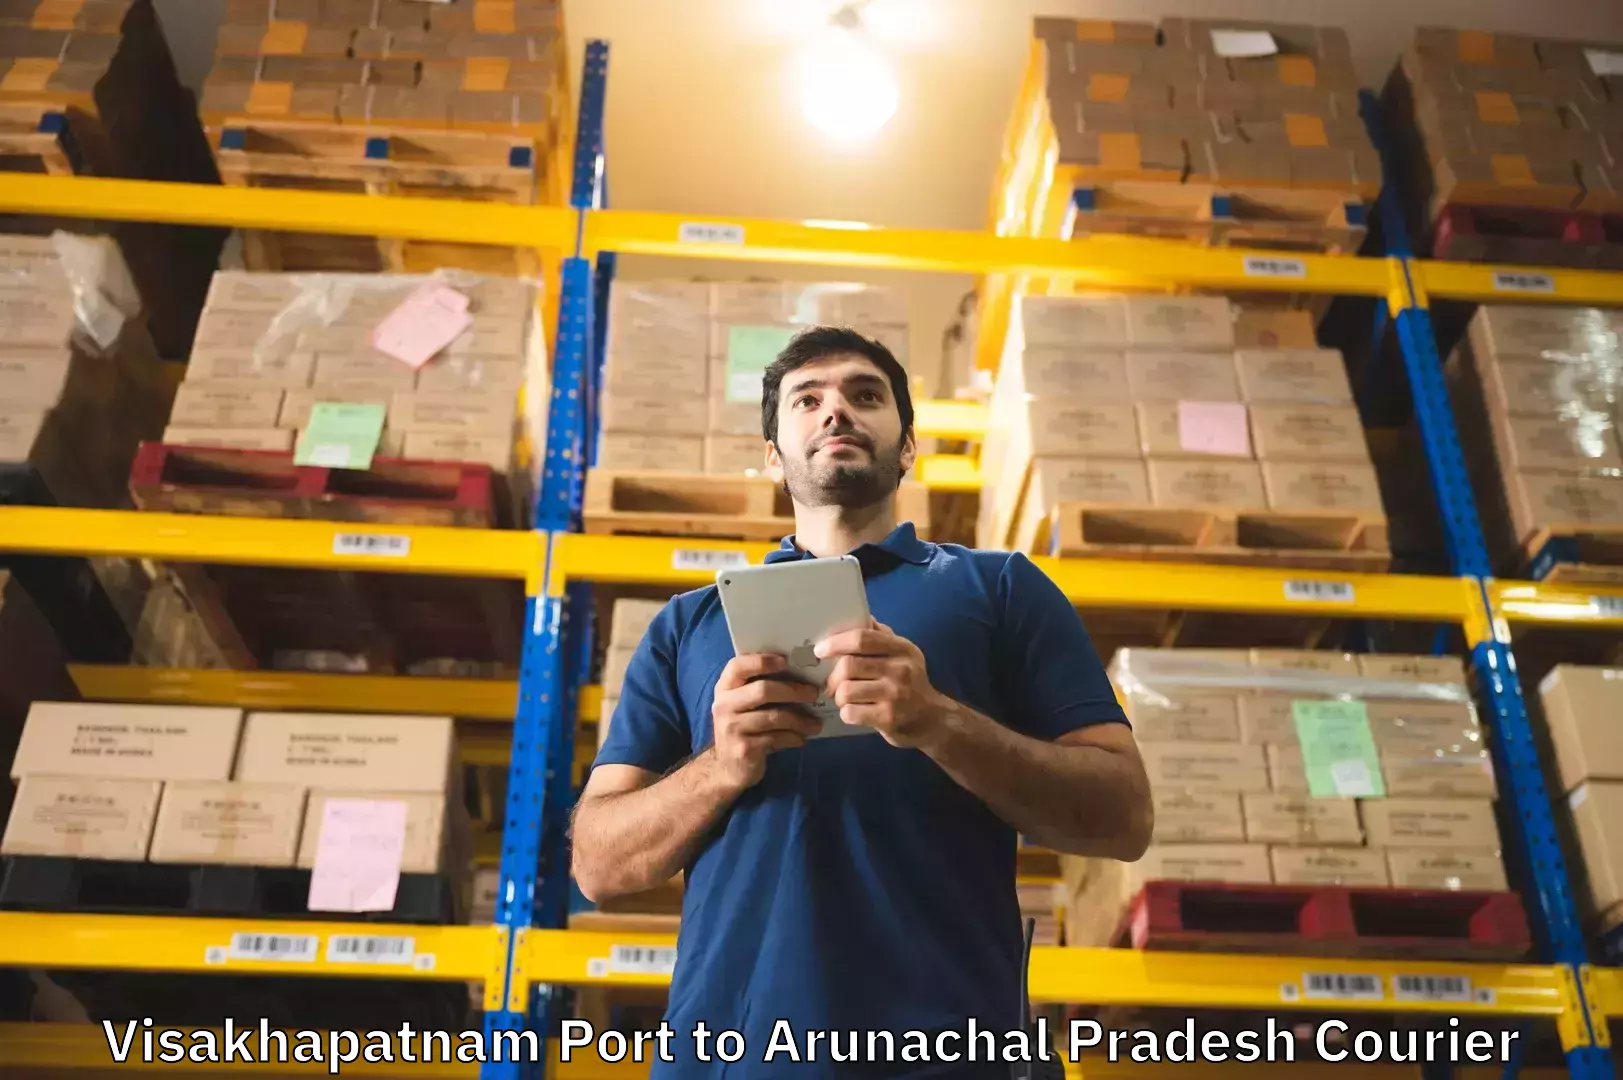 Nationwide luggage courier Visakhapatnam Port to Deomali